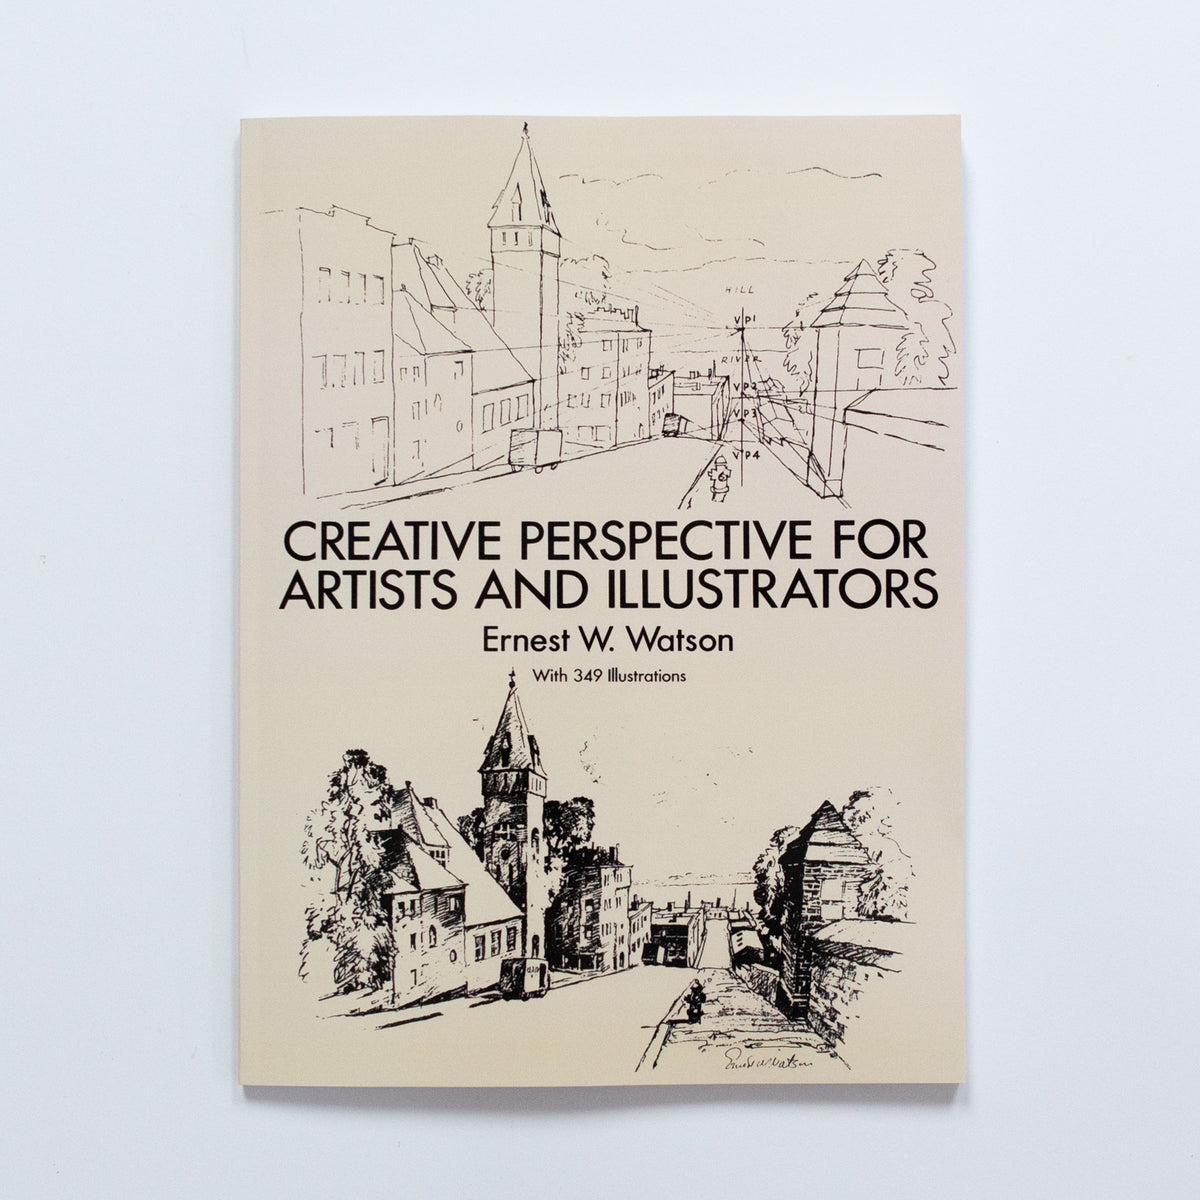 Creative Perspective for Artists and Illustrators by Ernest W. Watson